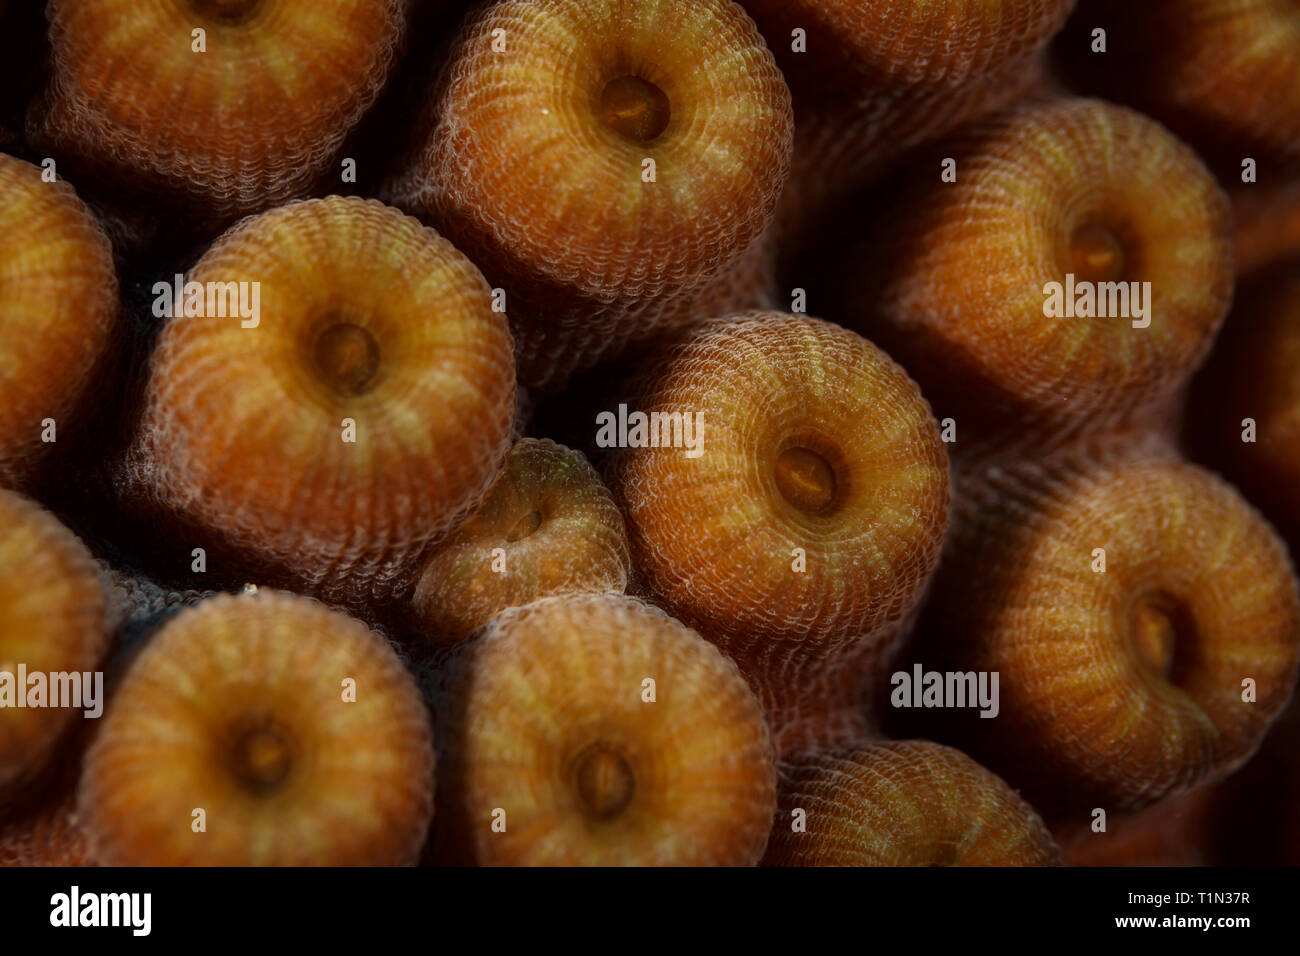 Closeup of stony coral cladocora caespitosa with its round cup shape when tentacles are not extended Stock Photo